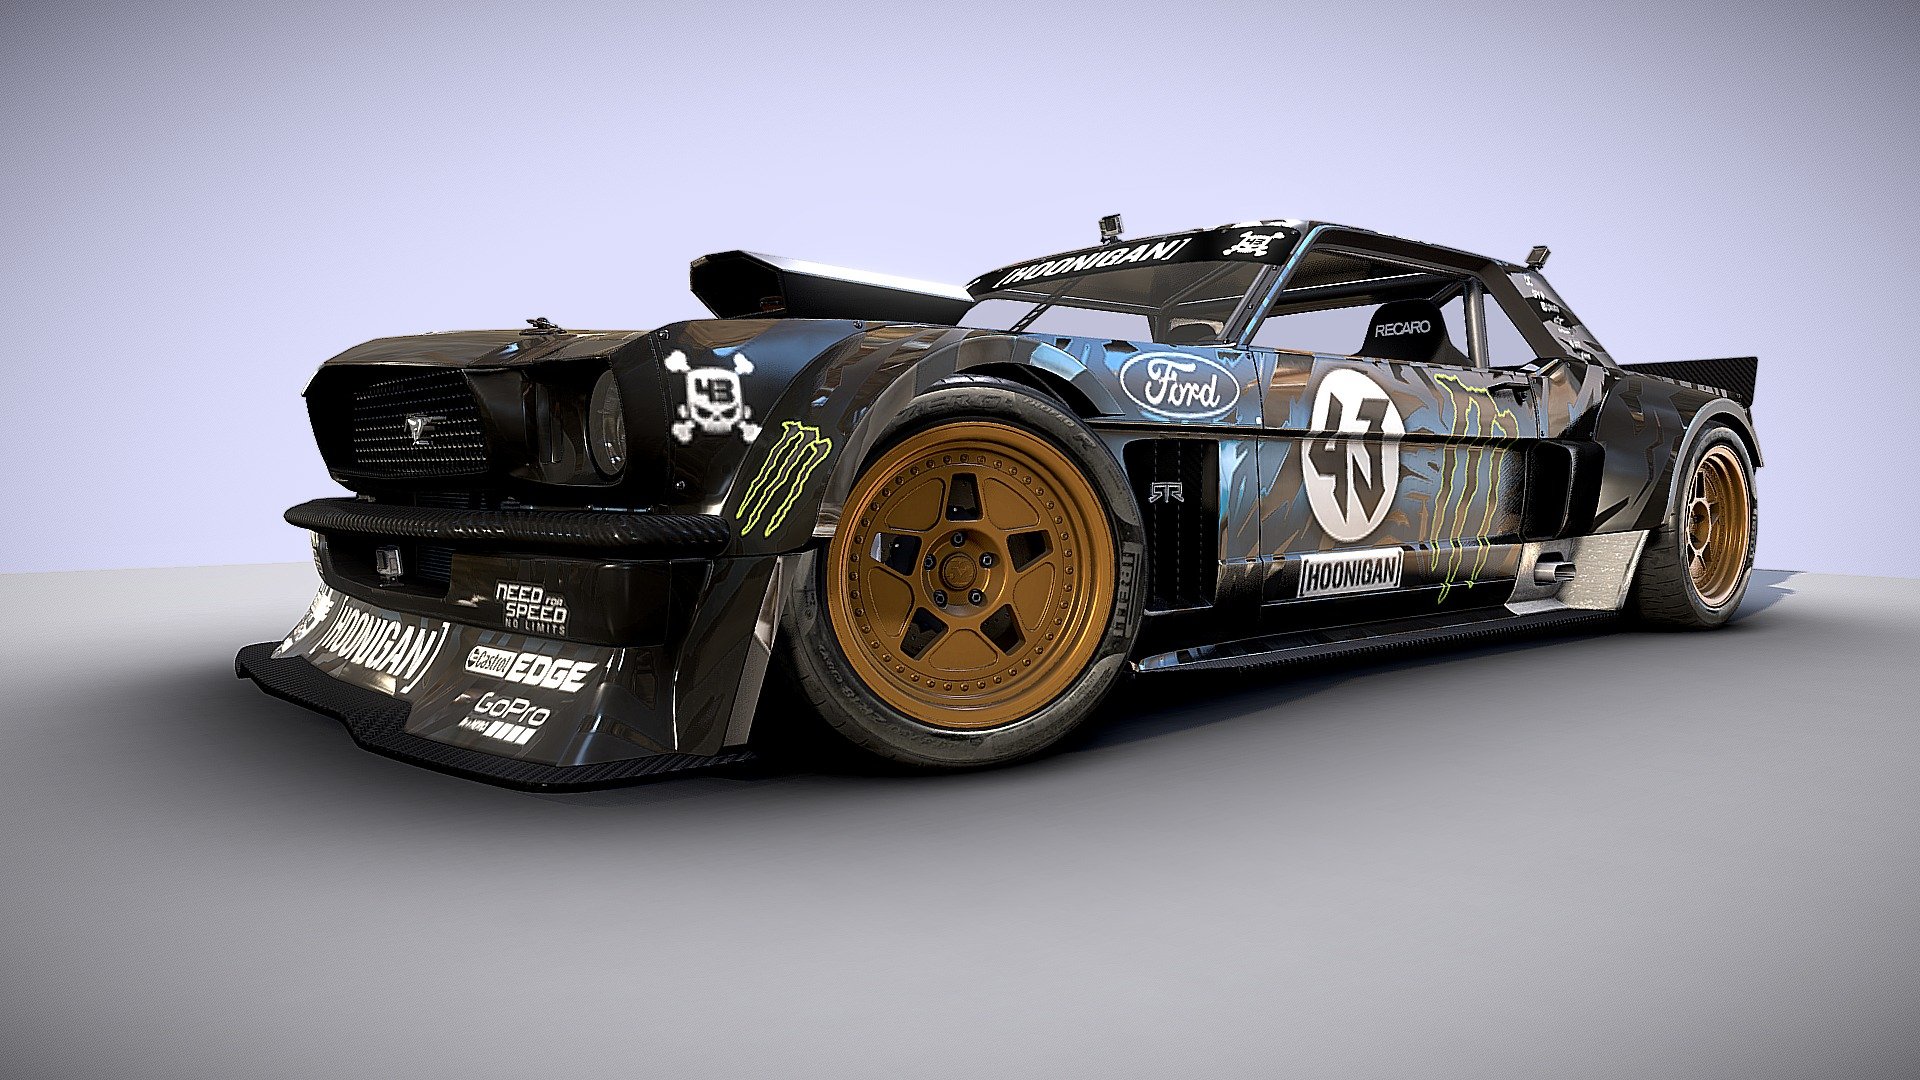 This is the a model of Ken Block's Project: the Hoonicorn RTR
All job done in Maya, substance Painter and Designer and Photoshop - Hoonicorn RTR - 3D model by Deca 3d model